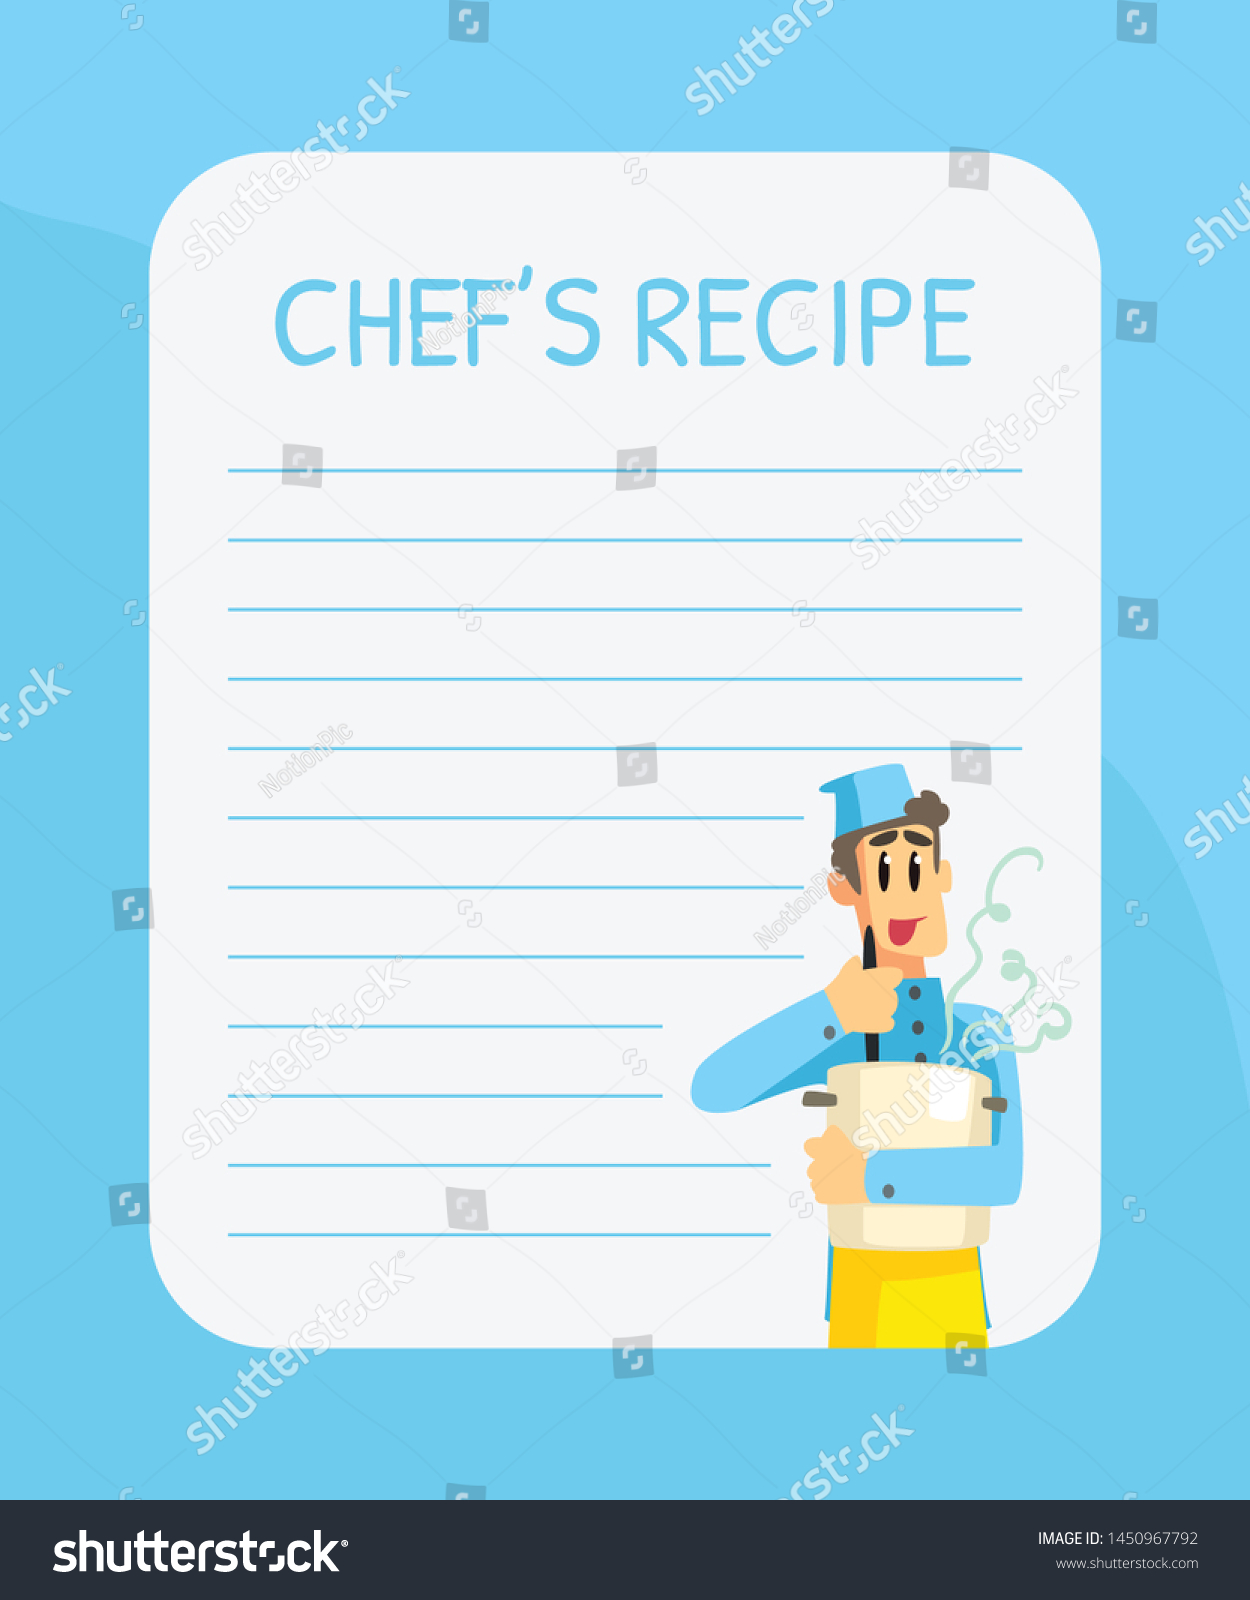 Blank Recipe Card Template from image.shutterstock.com